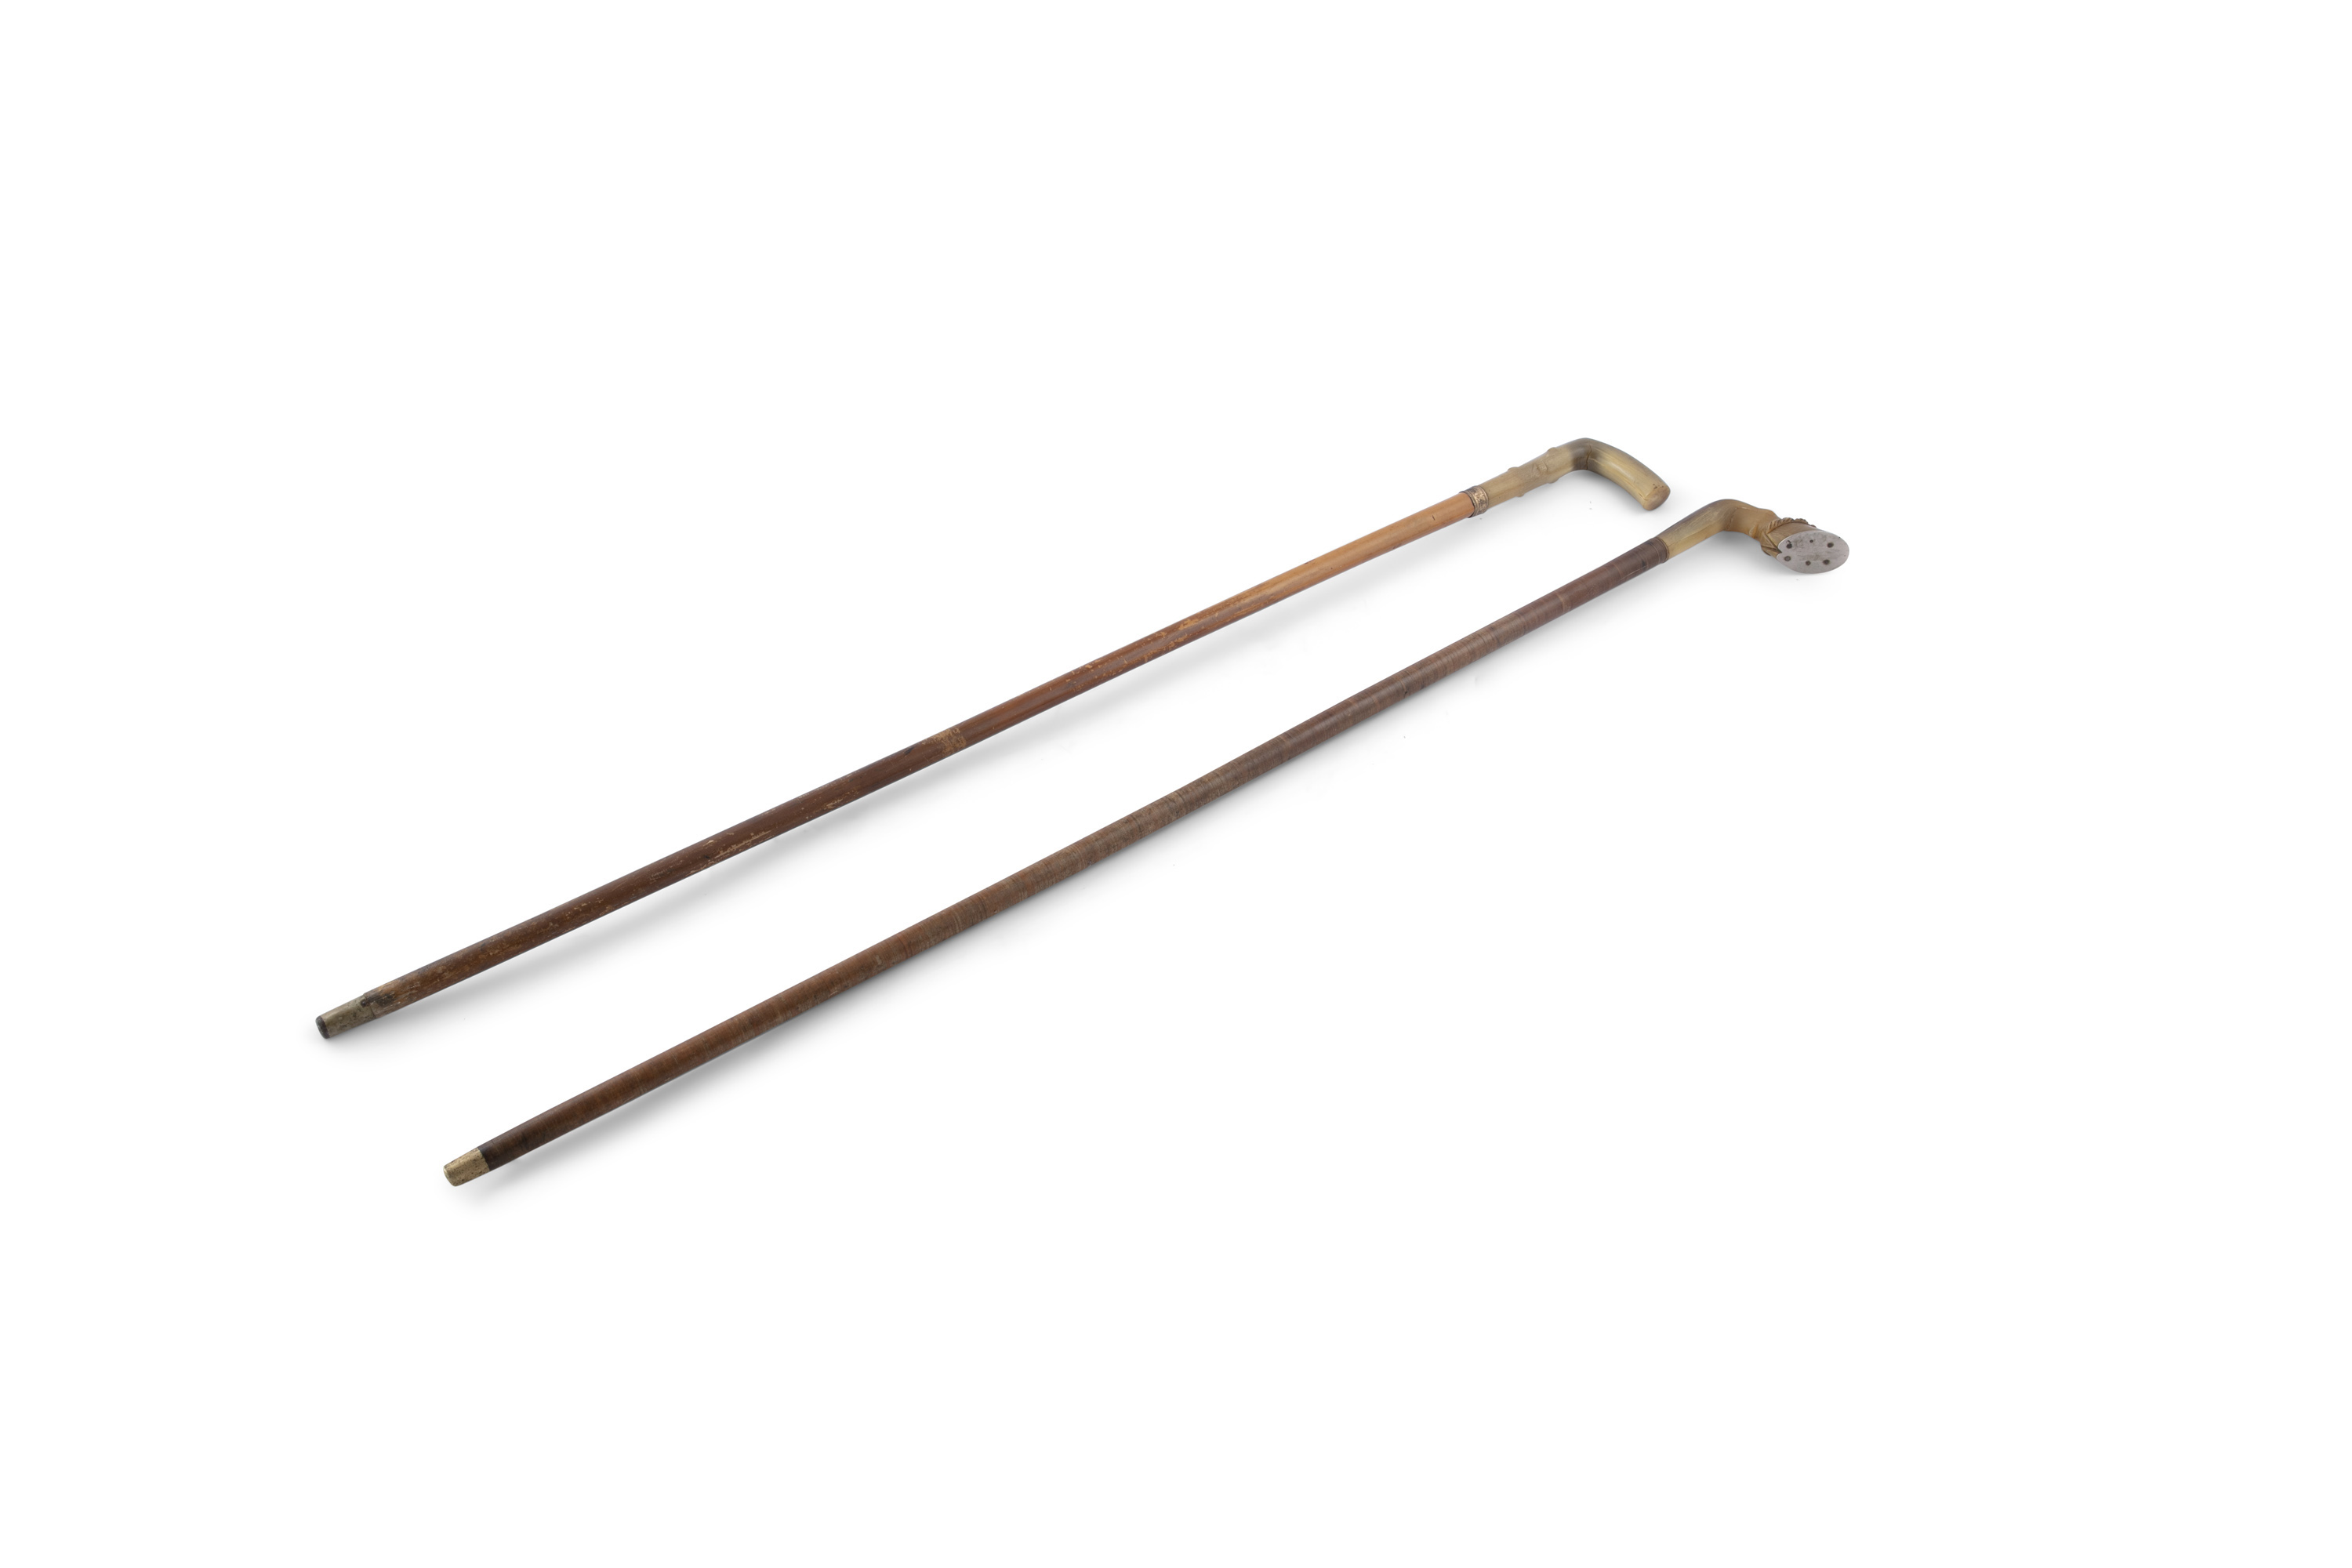 TWO HORNHANDLED WALKING CANES, each 85cm high